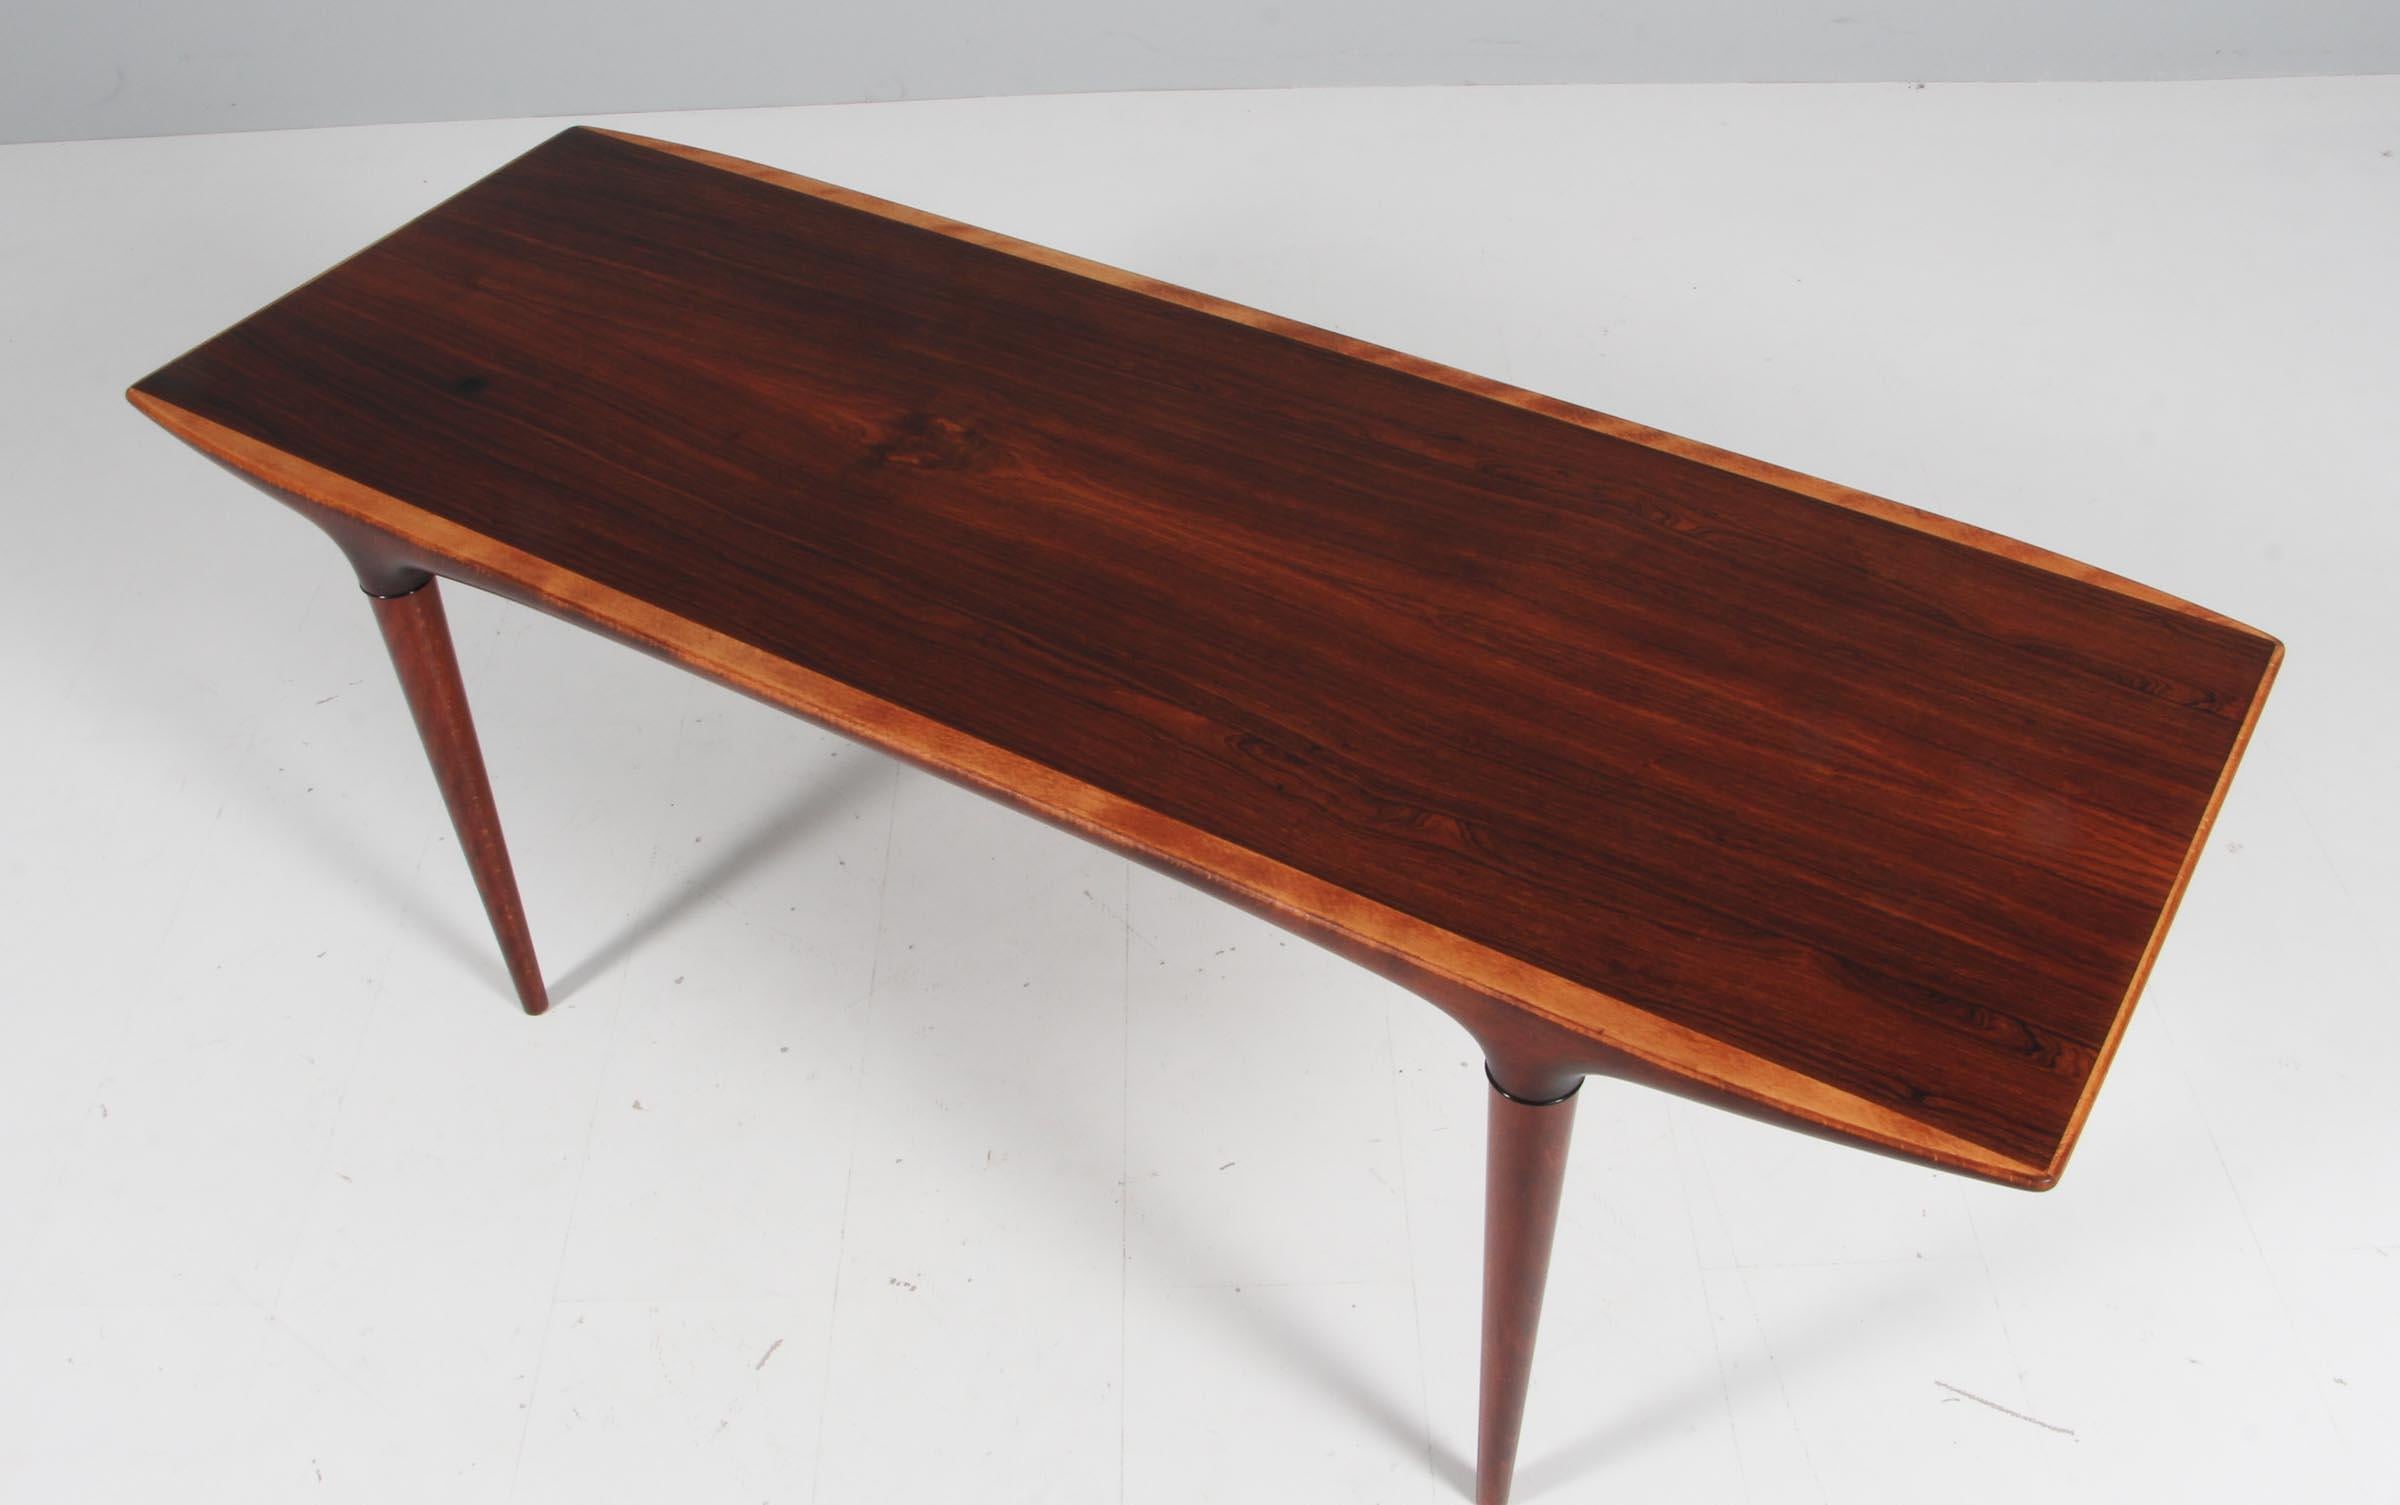 Svante Skogh coffee table in rosewood.

Made in the 1960s